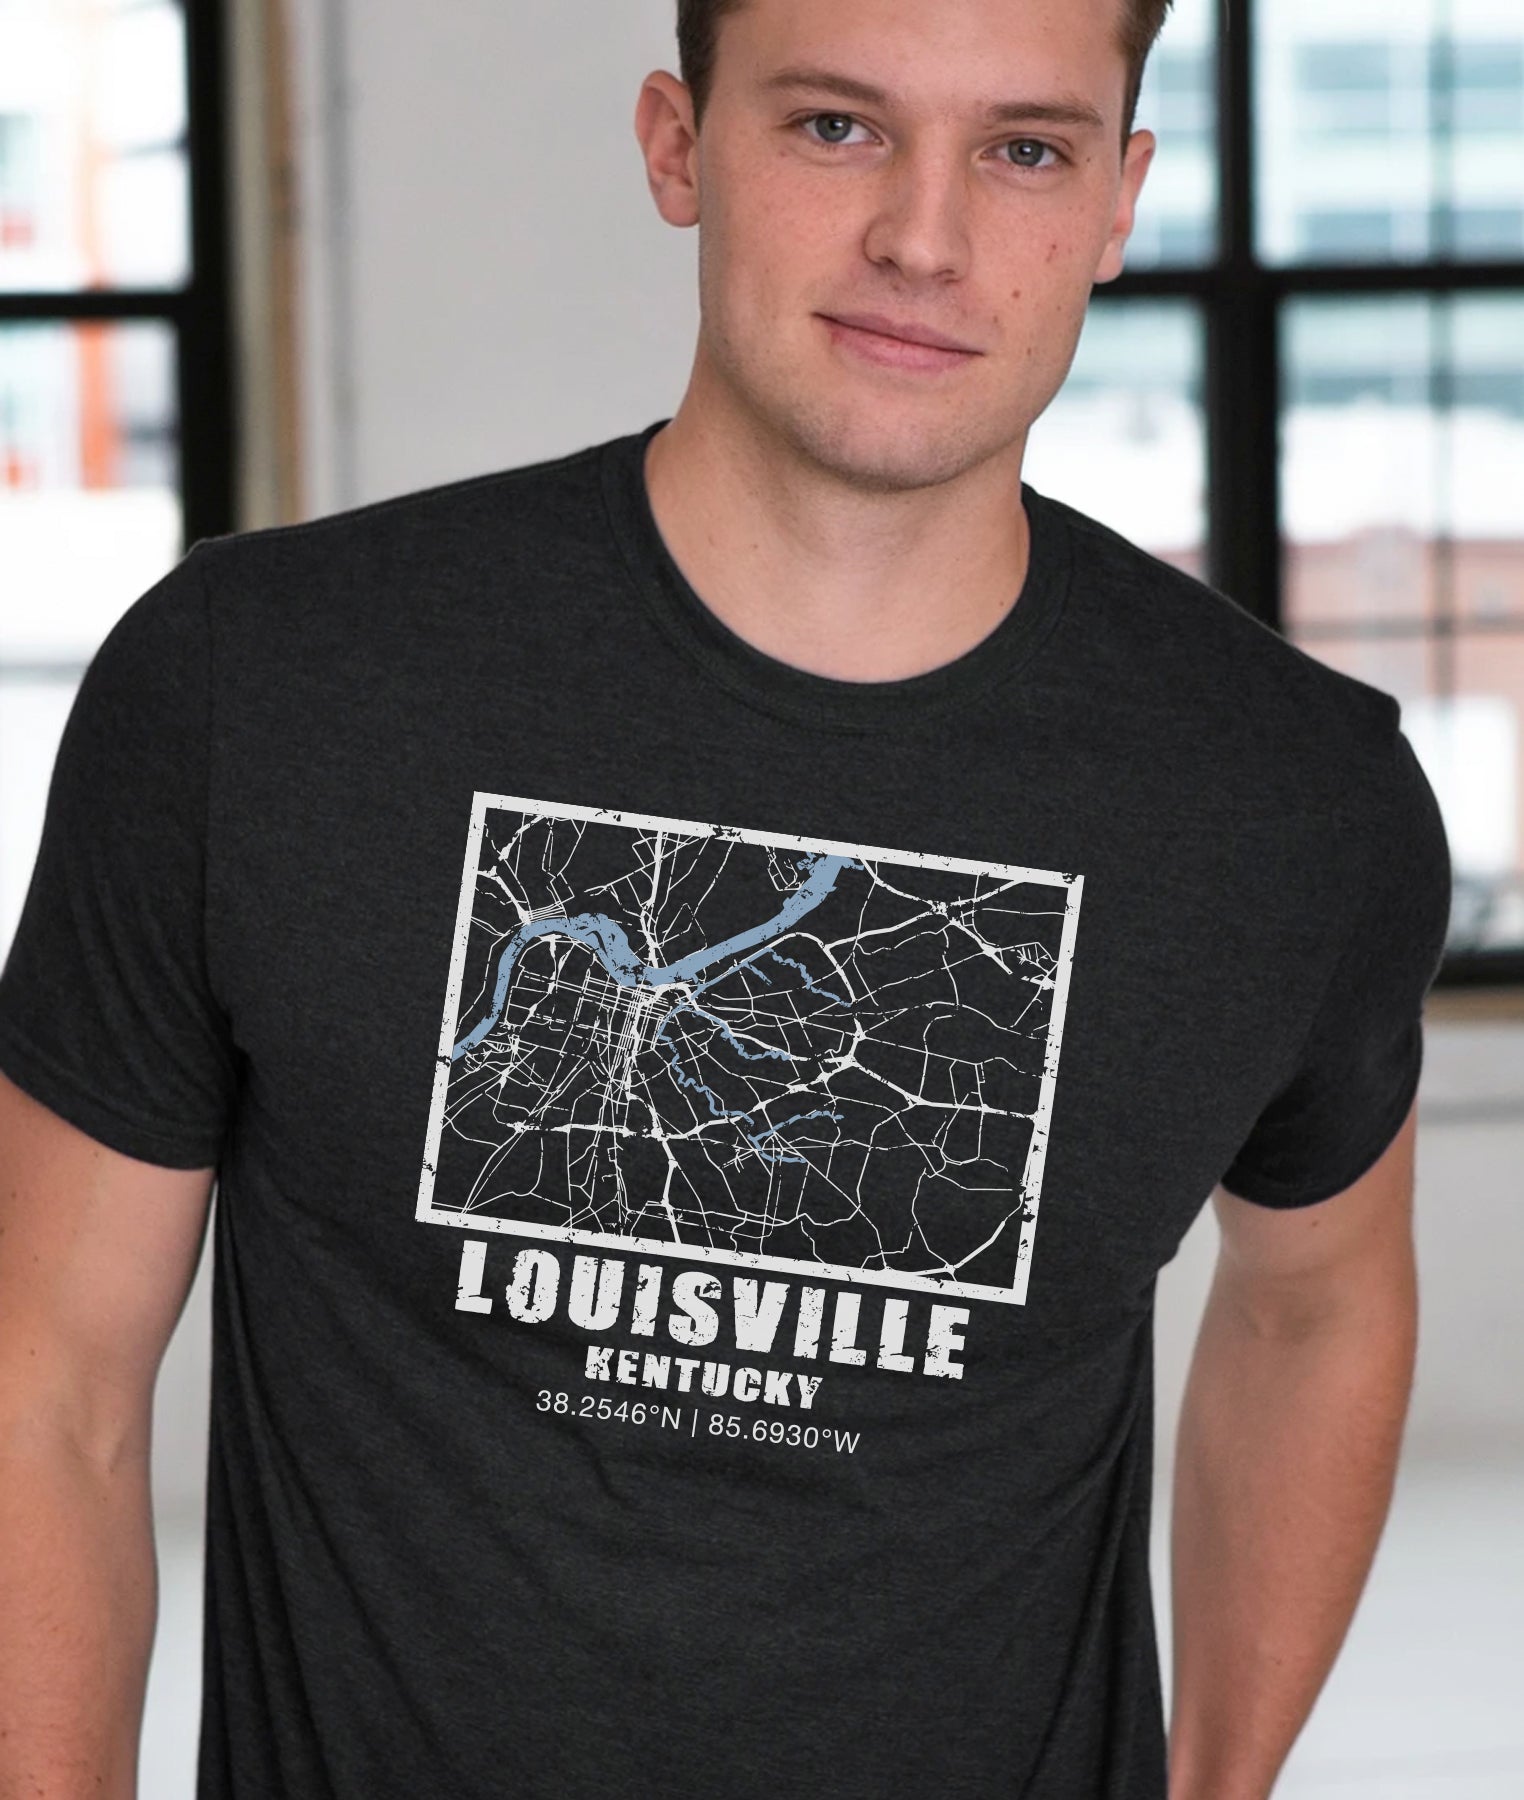 Louisville Languages Red T-Shirt with Short Sleeves - GOEX - Just Creations